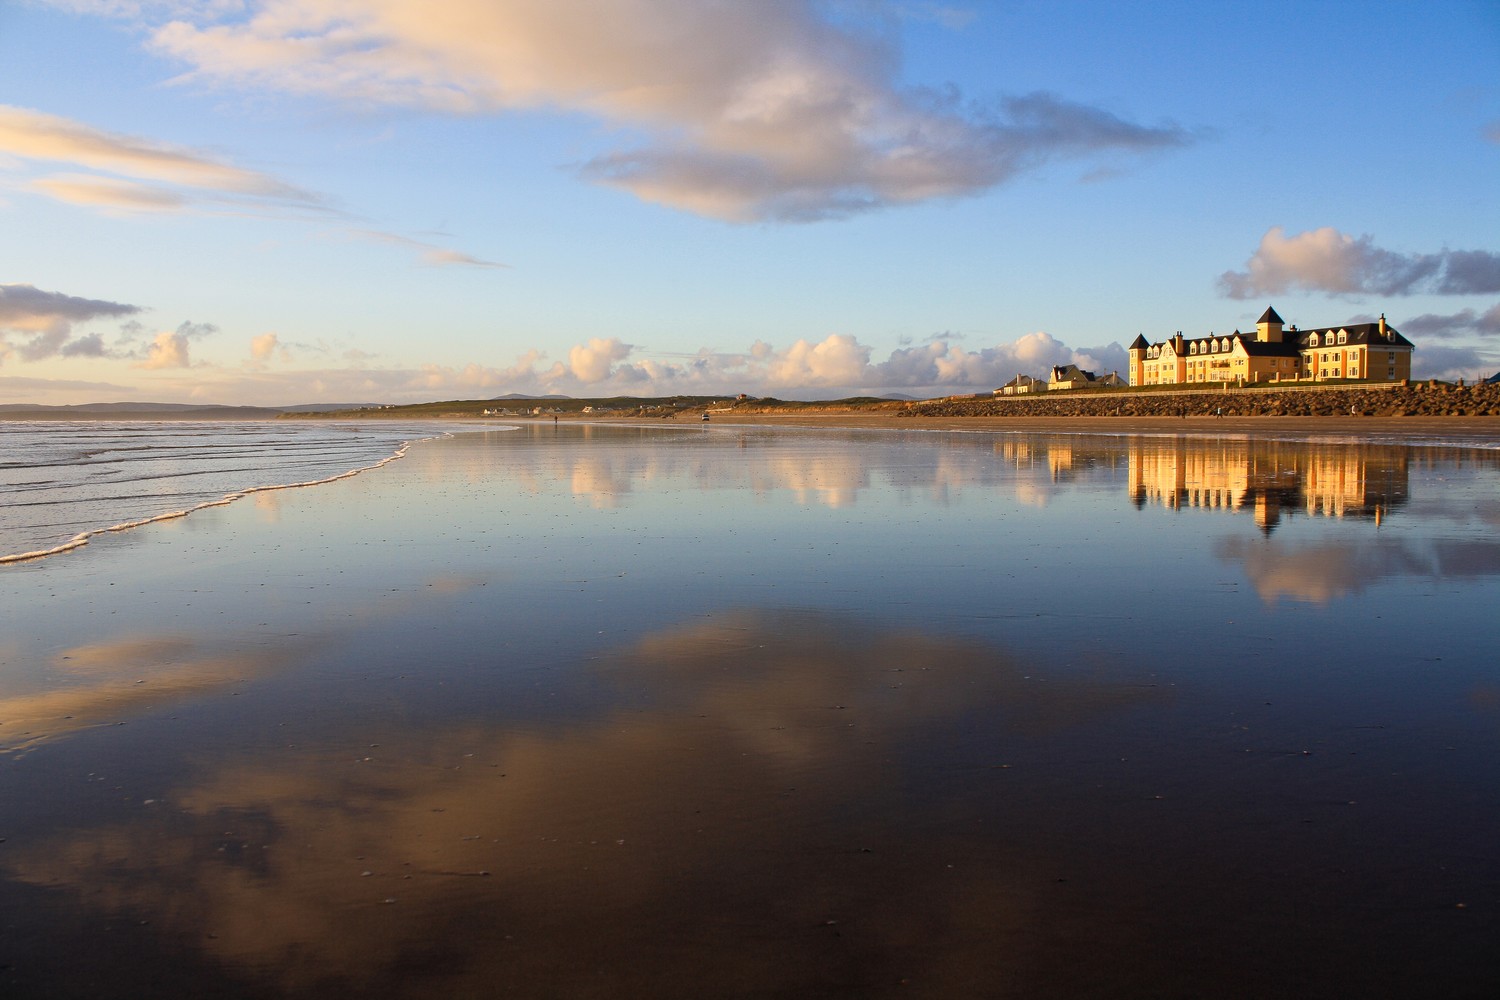 Sandhouse Hotel, Rossnowlagh, Donegal Bay, Contea di Donegal